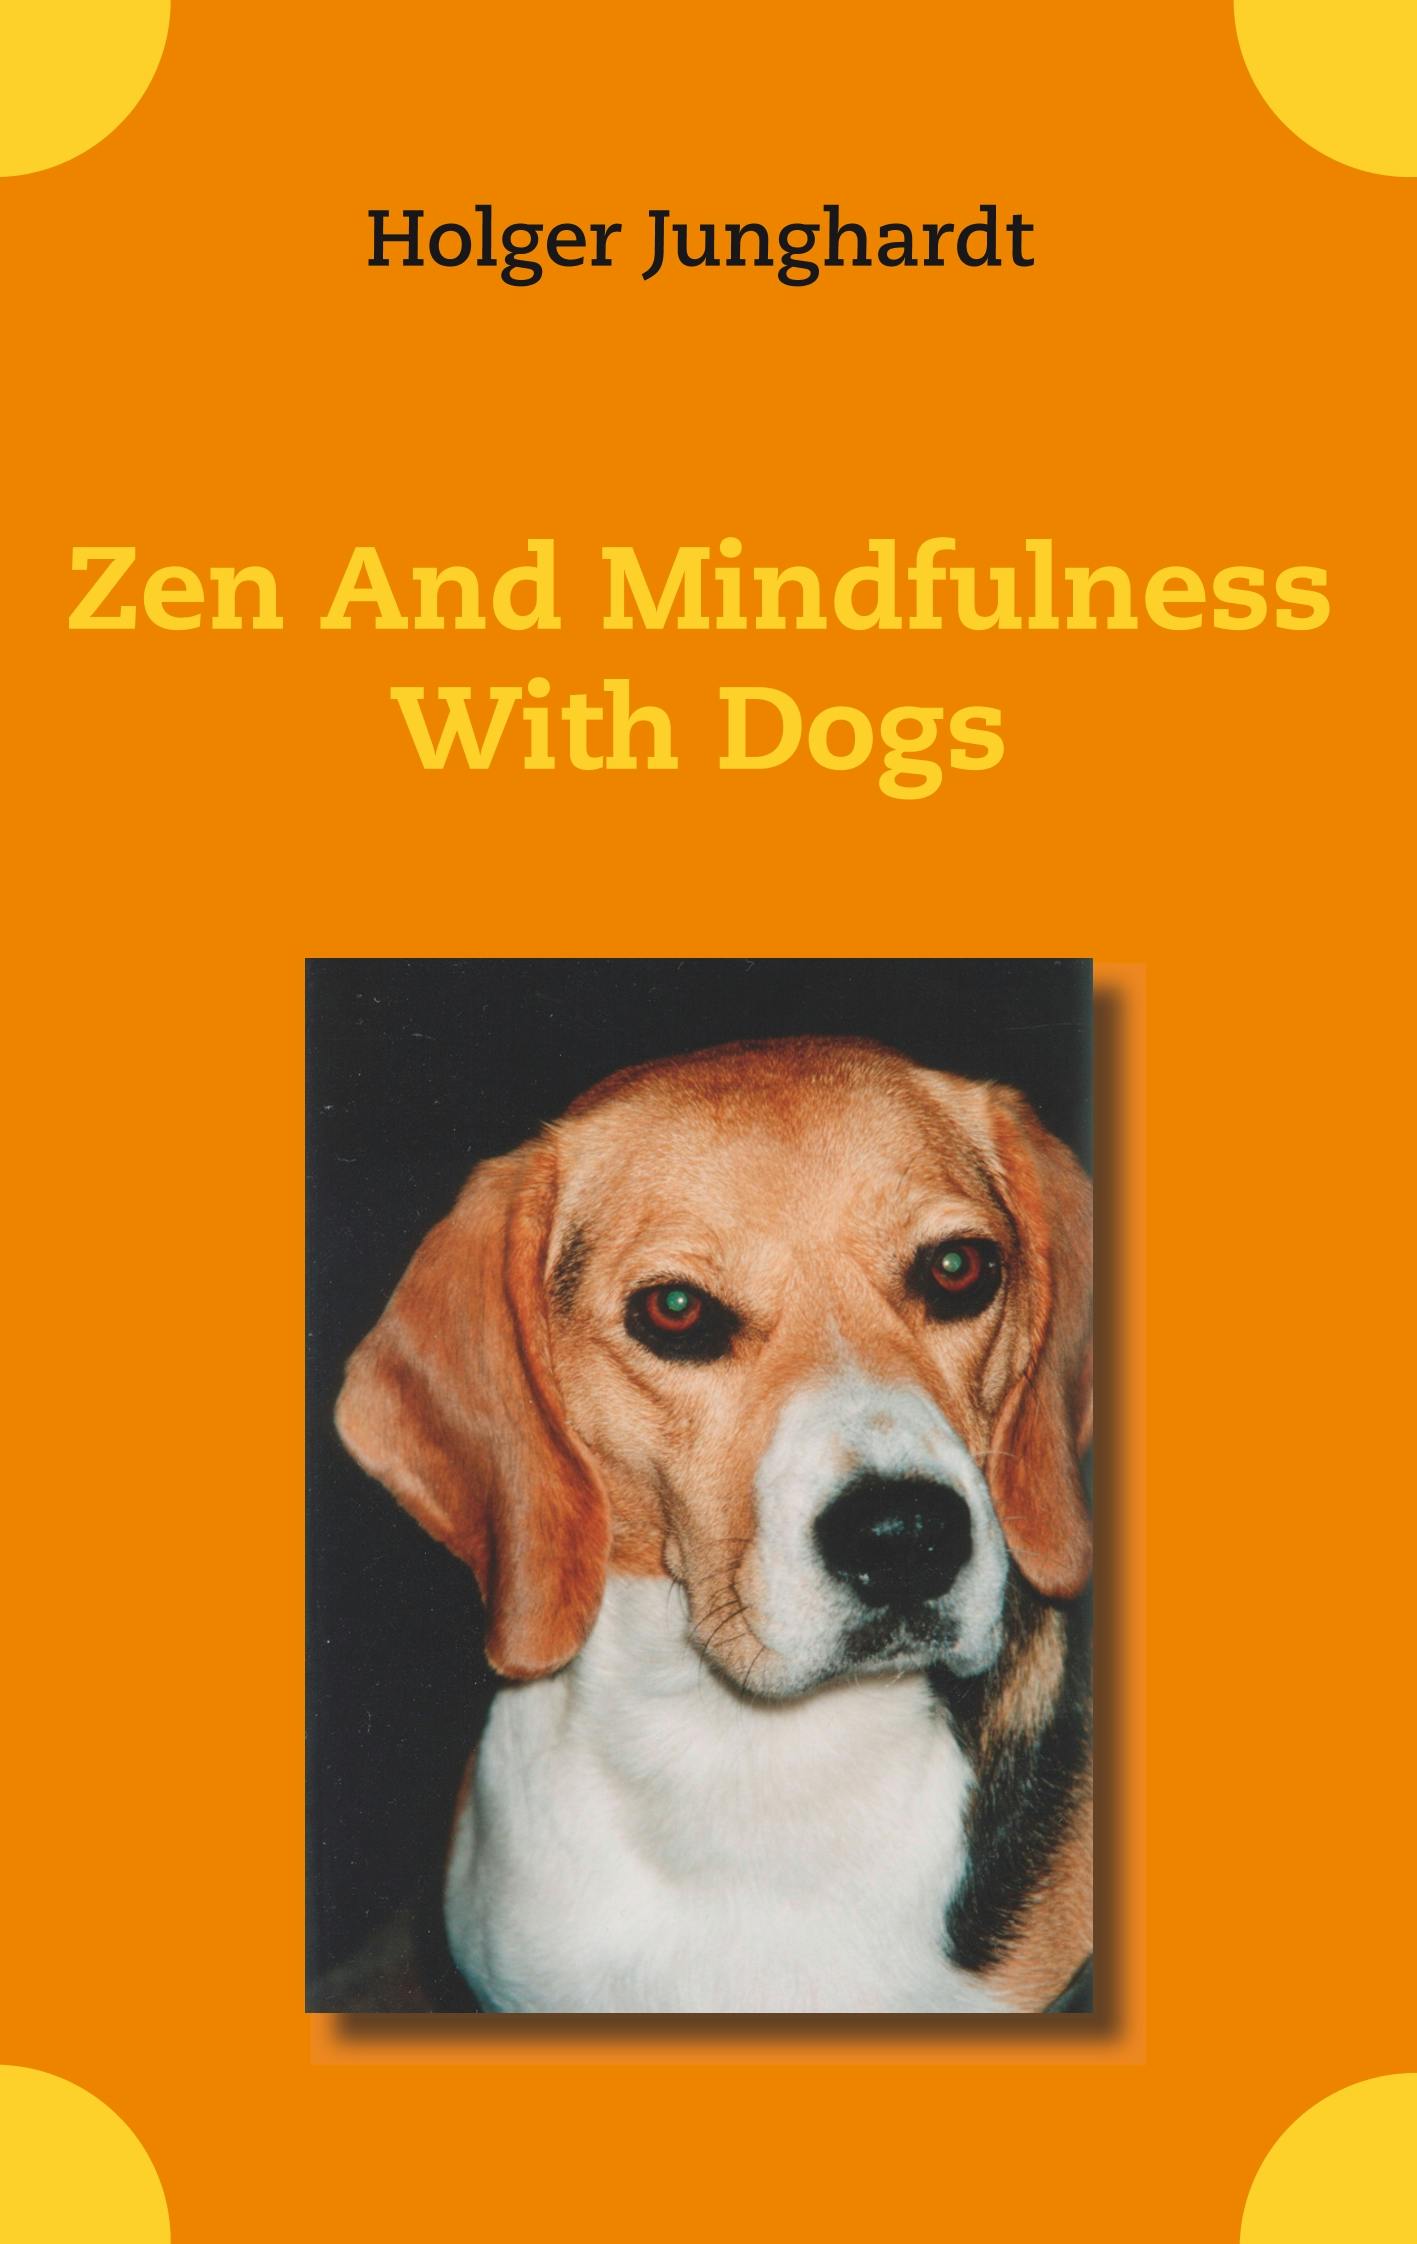 Zen And Mindfulness With Dogs - Holger Junghardt